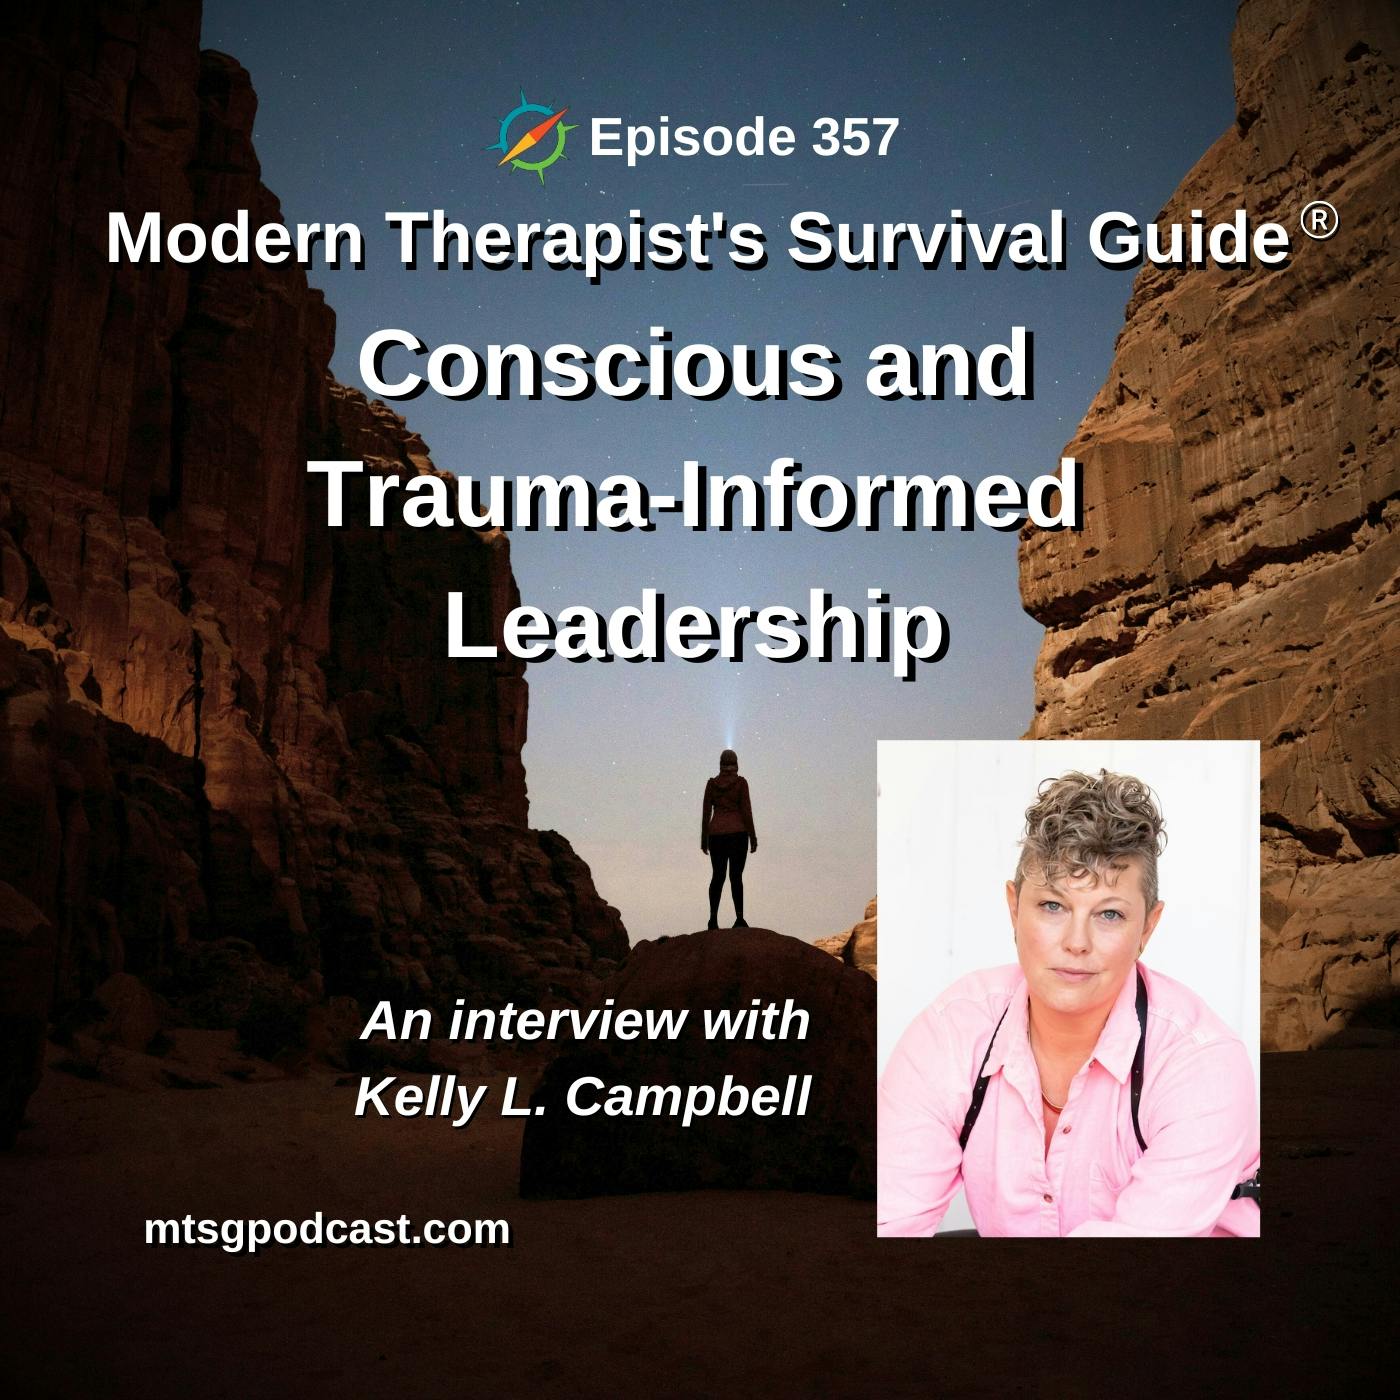 Conscious and Trauma-Informed Leadership: An interview with Kelly L. Campbell